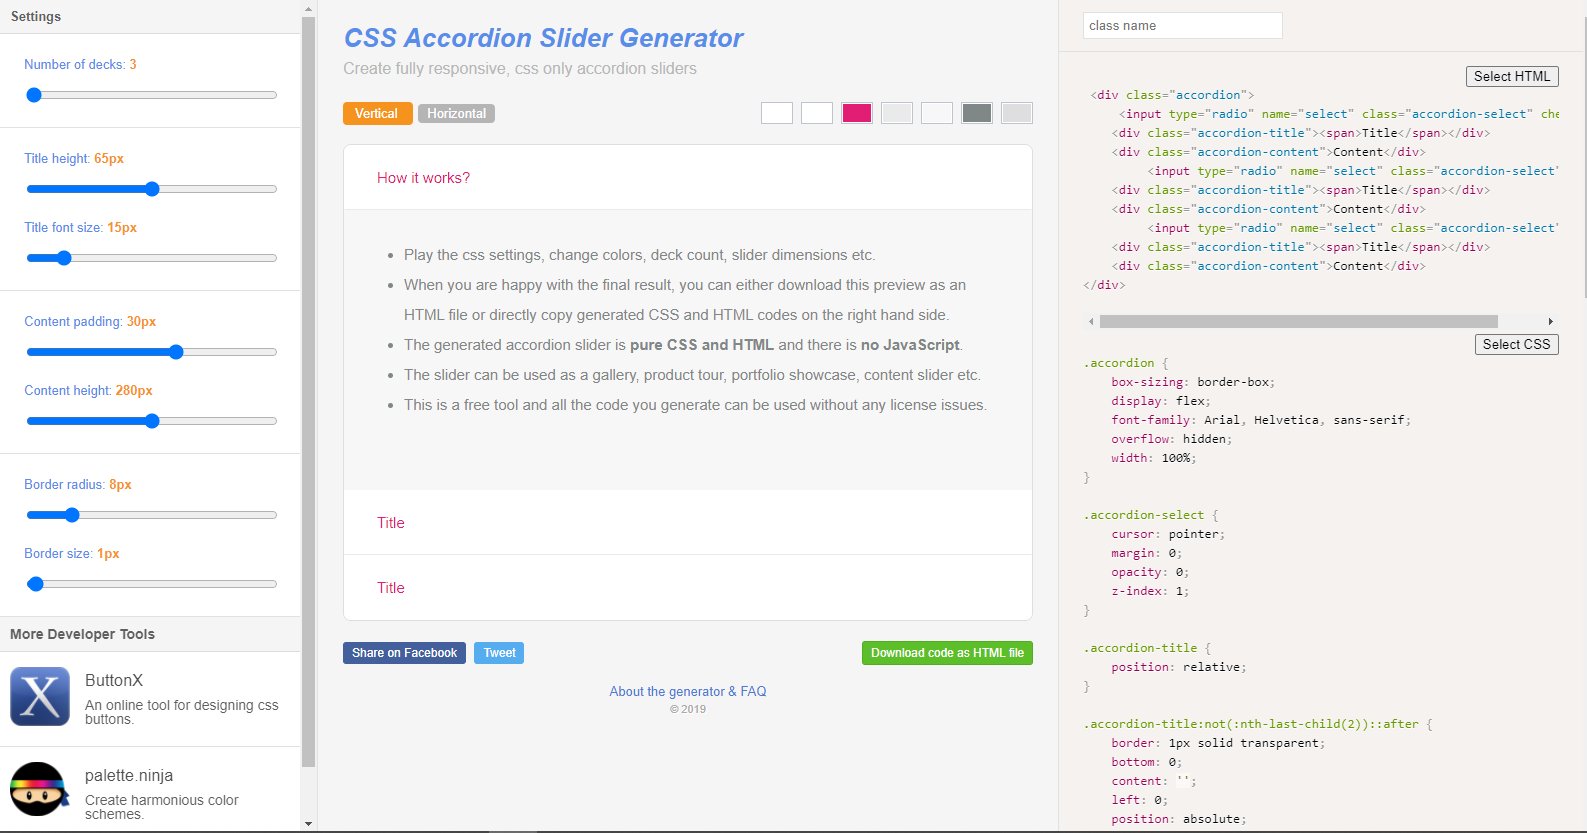 Home page of CSS Accordion Slider Generator.